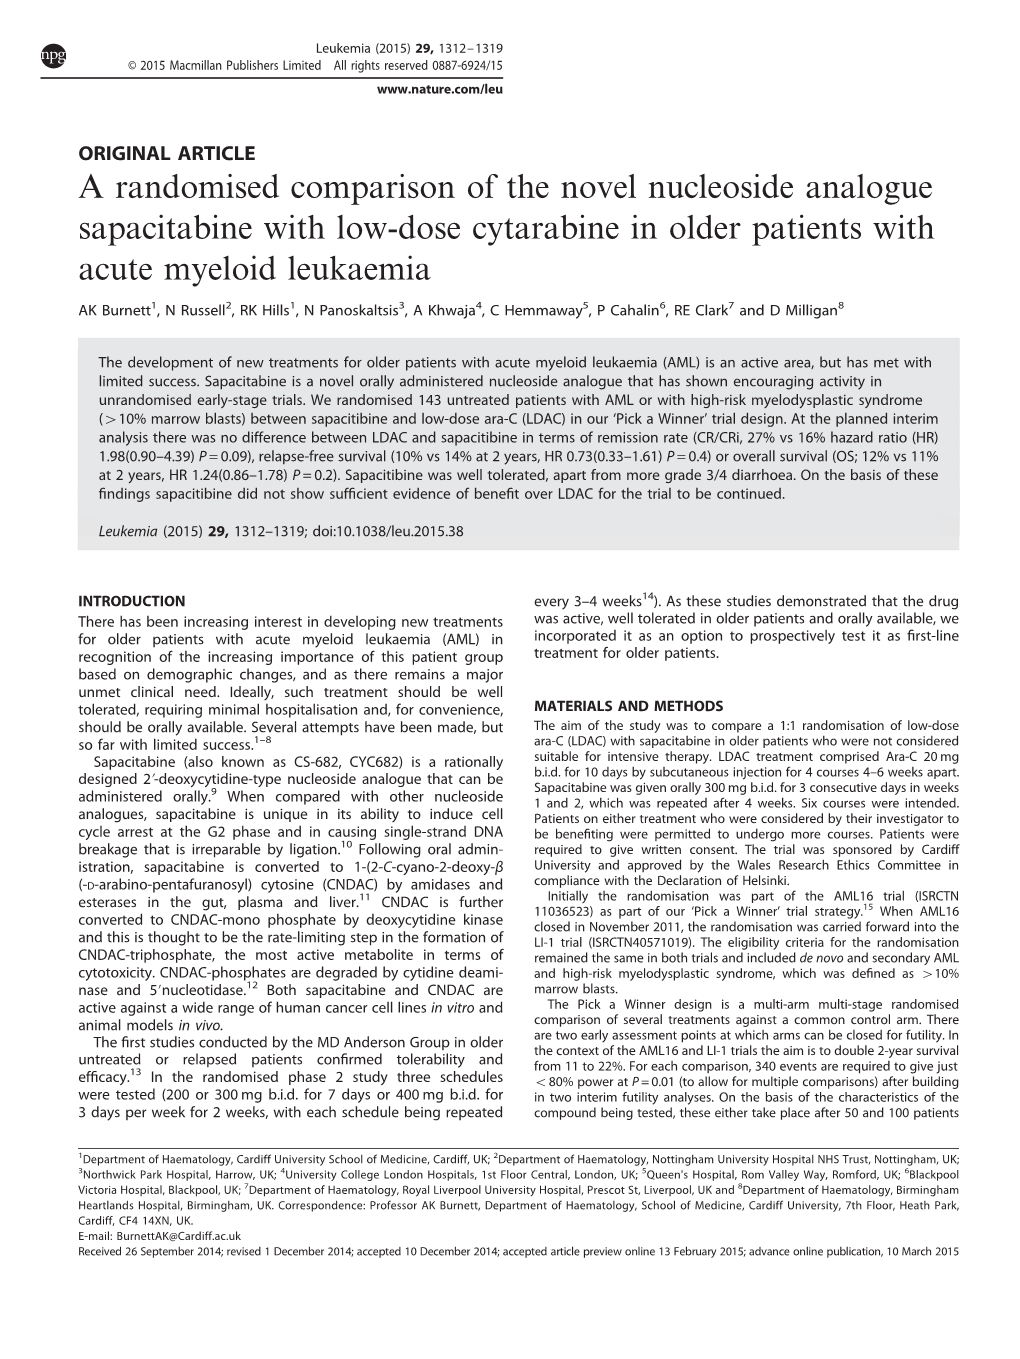 A Randomised Comparison of the Novel Nucleoside Analogue Sapacitabine with Low-Dose Cytarabine in Older Patients with Acute Myeloid Leukaemia